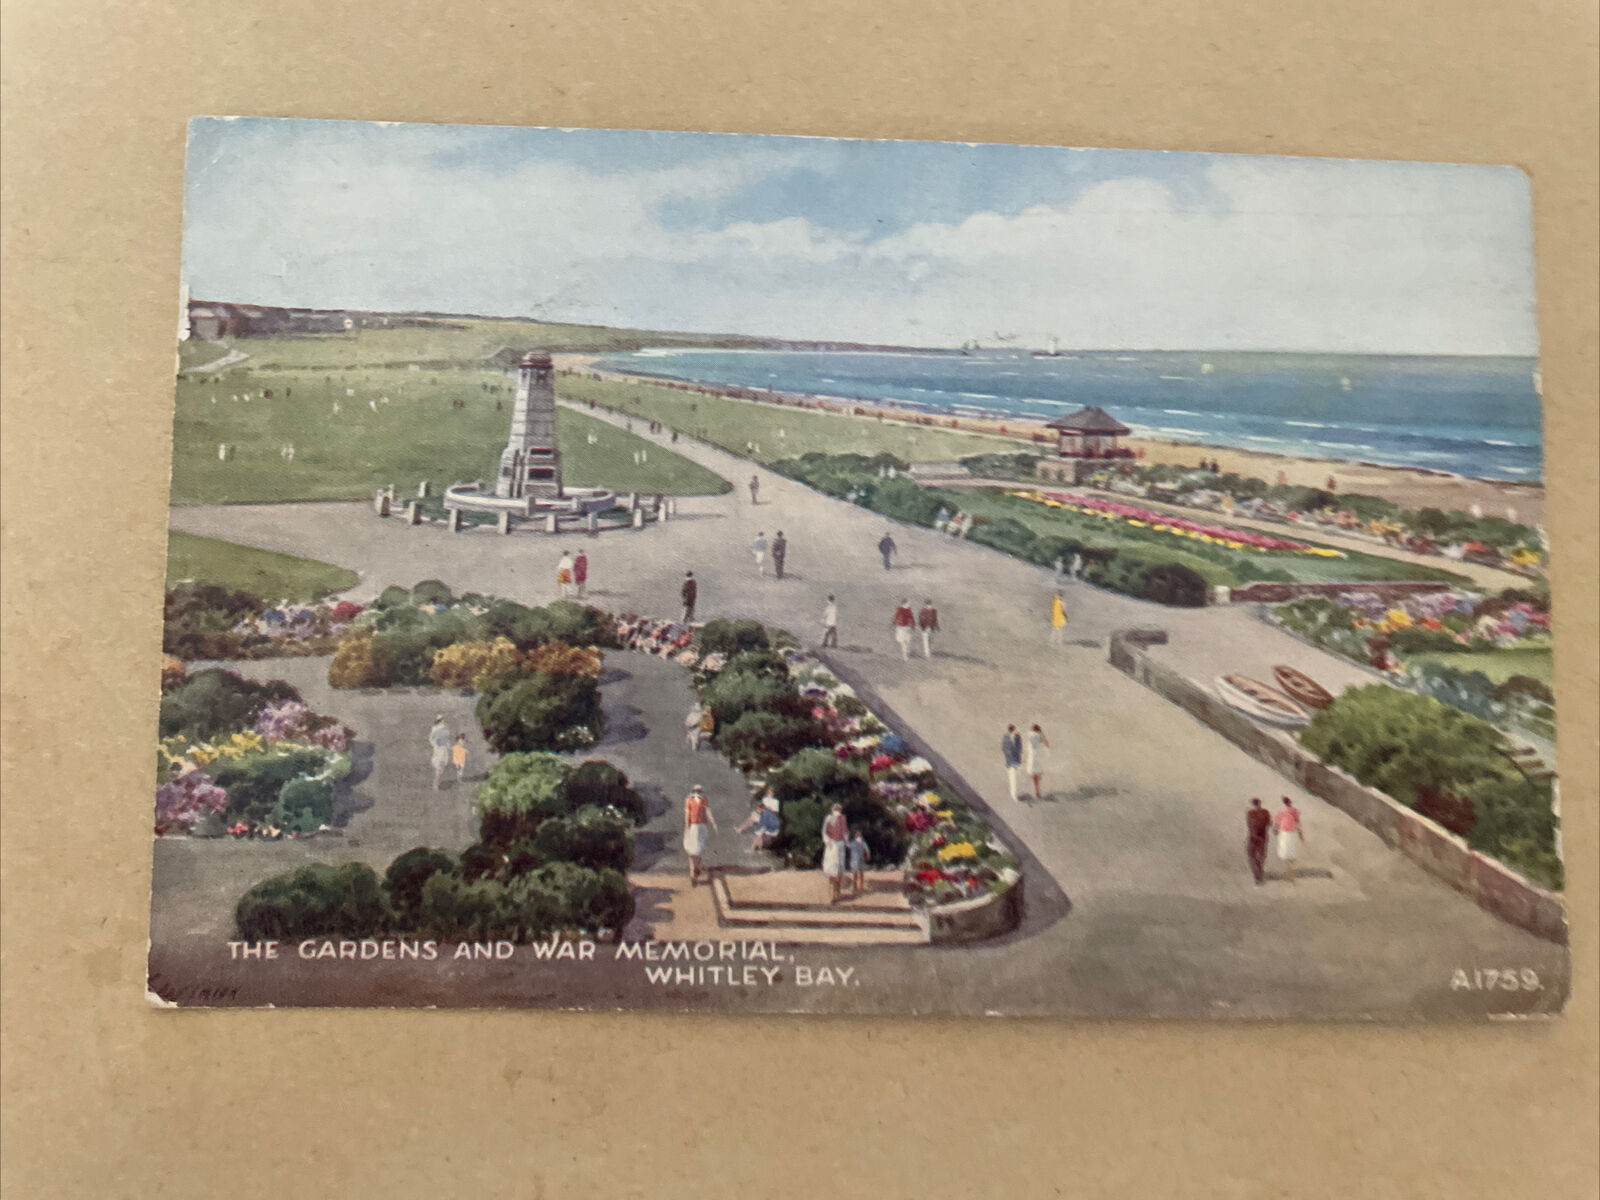 House Clearance - The Gardens and War Memorial, Whitley Bay